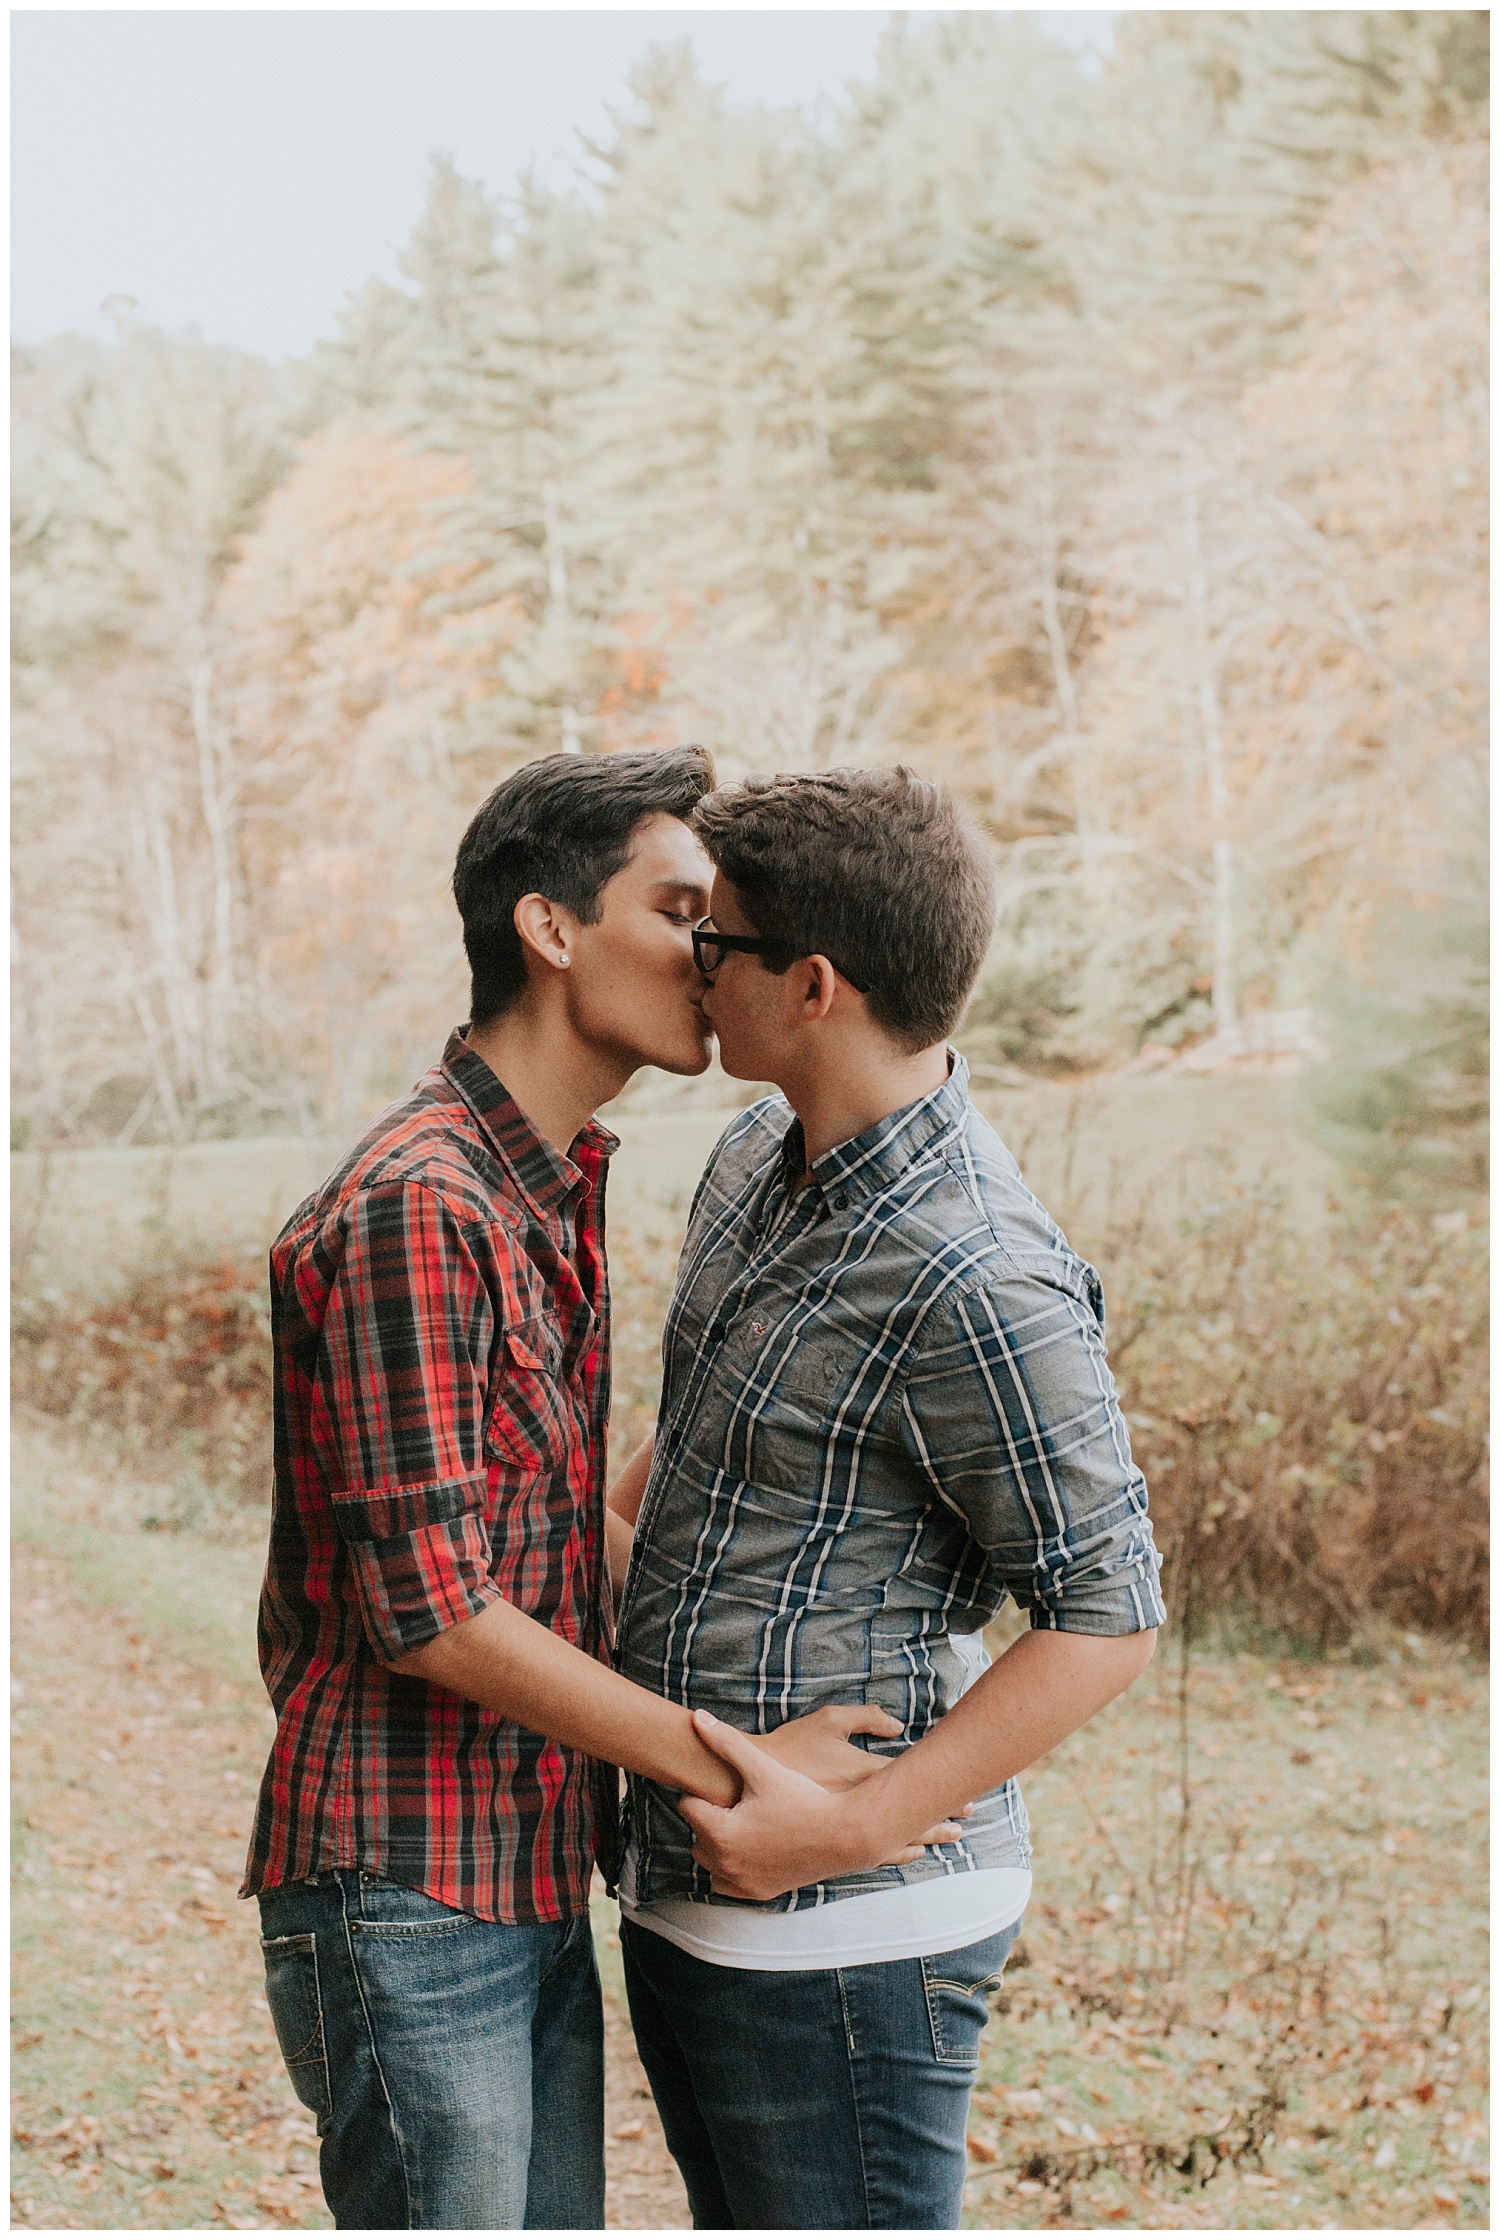  adventurous anniversary session in blowing rock, nc |north carolina elopement photographer | mountain elopement inspiration | wild onyx photography | www.wildonyxphotography.com 